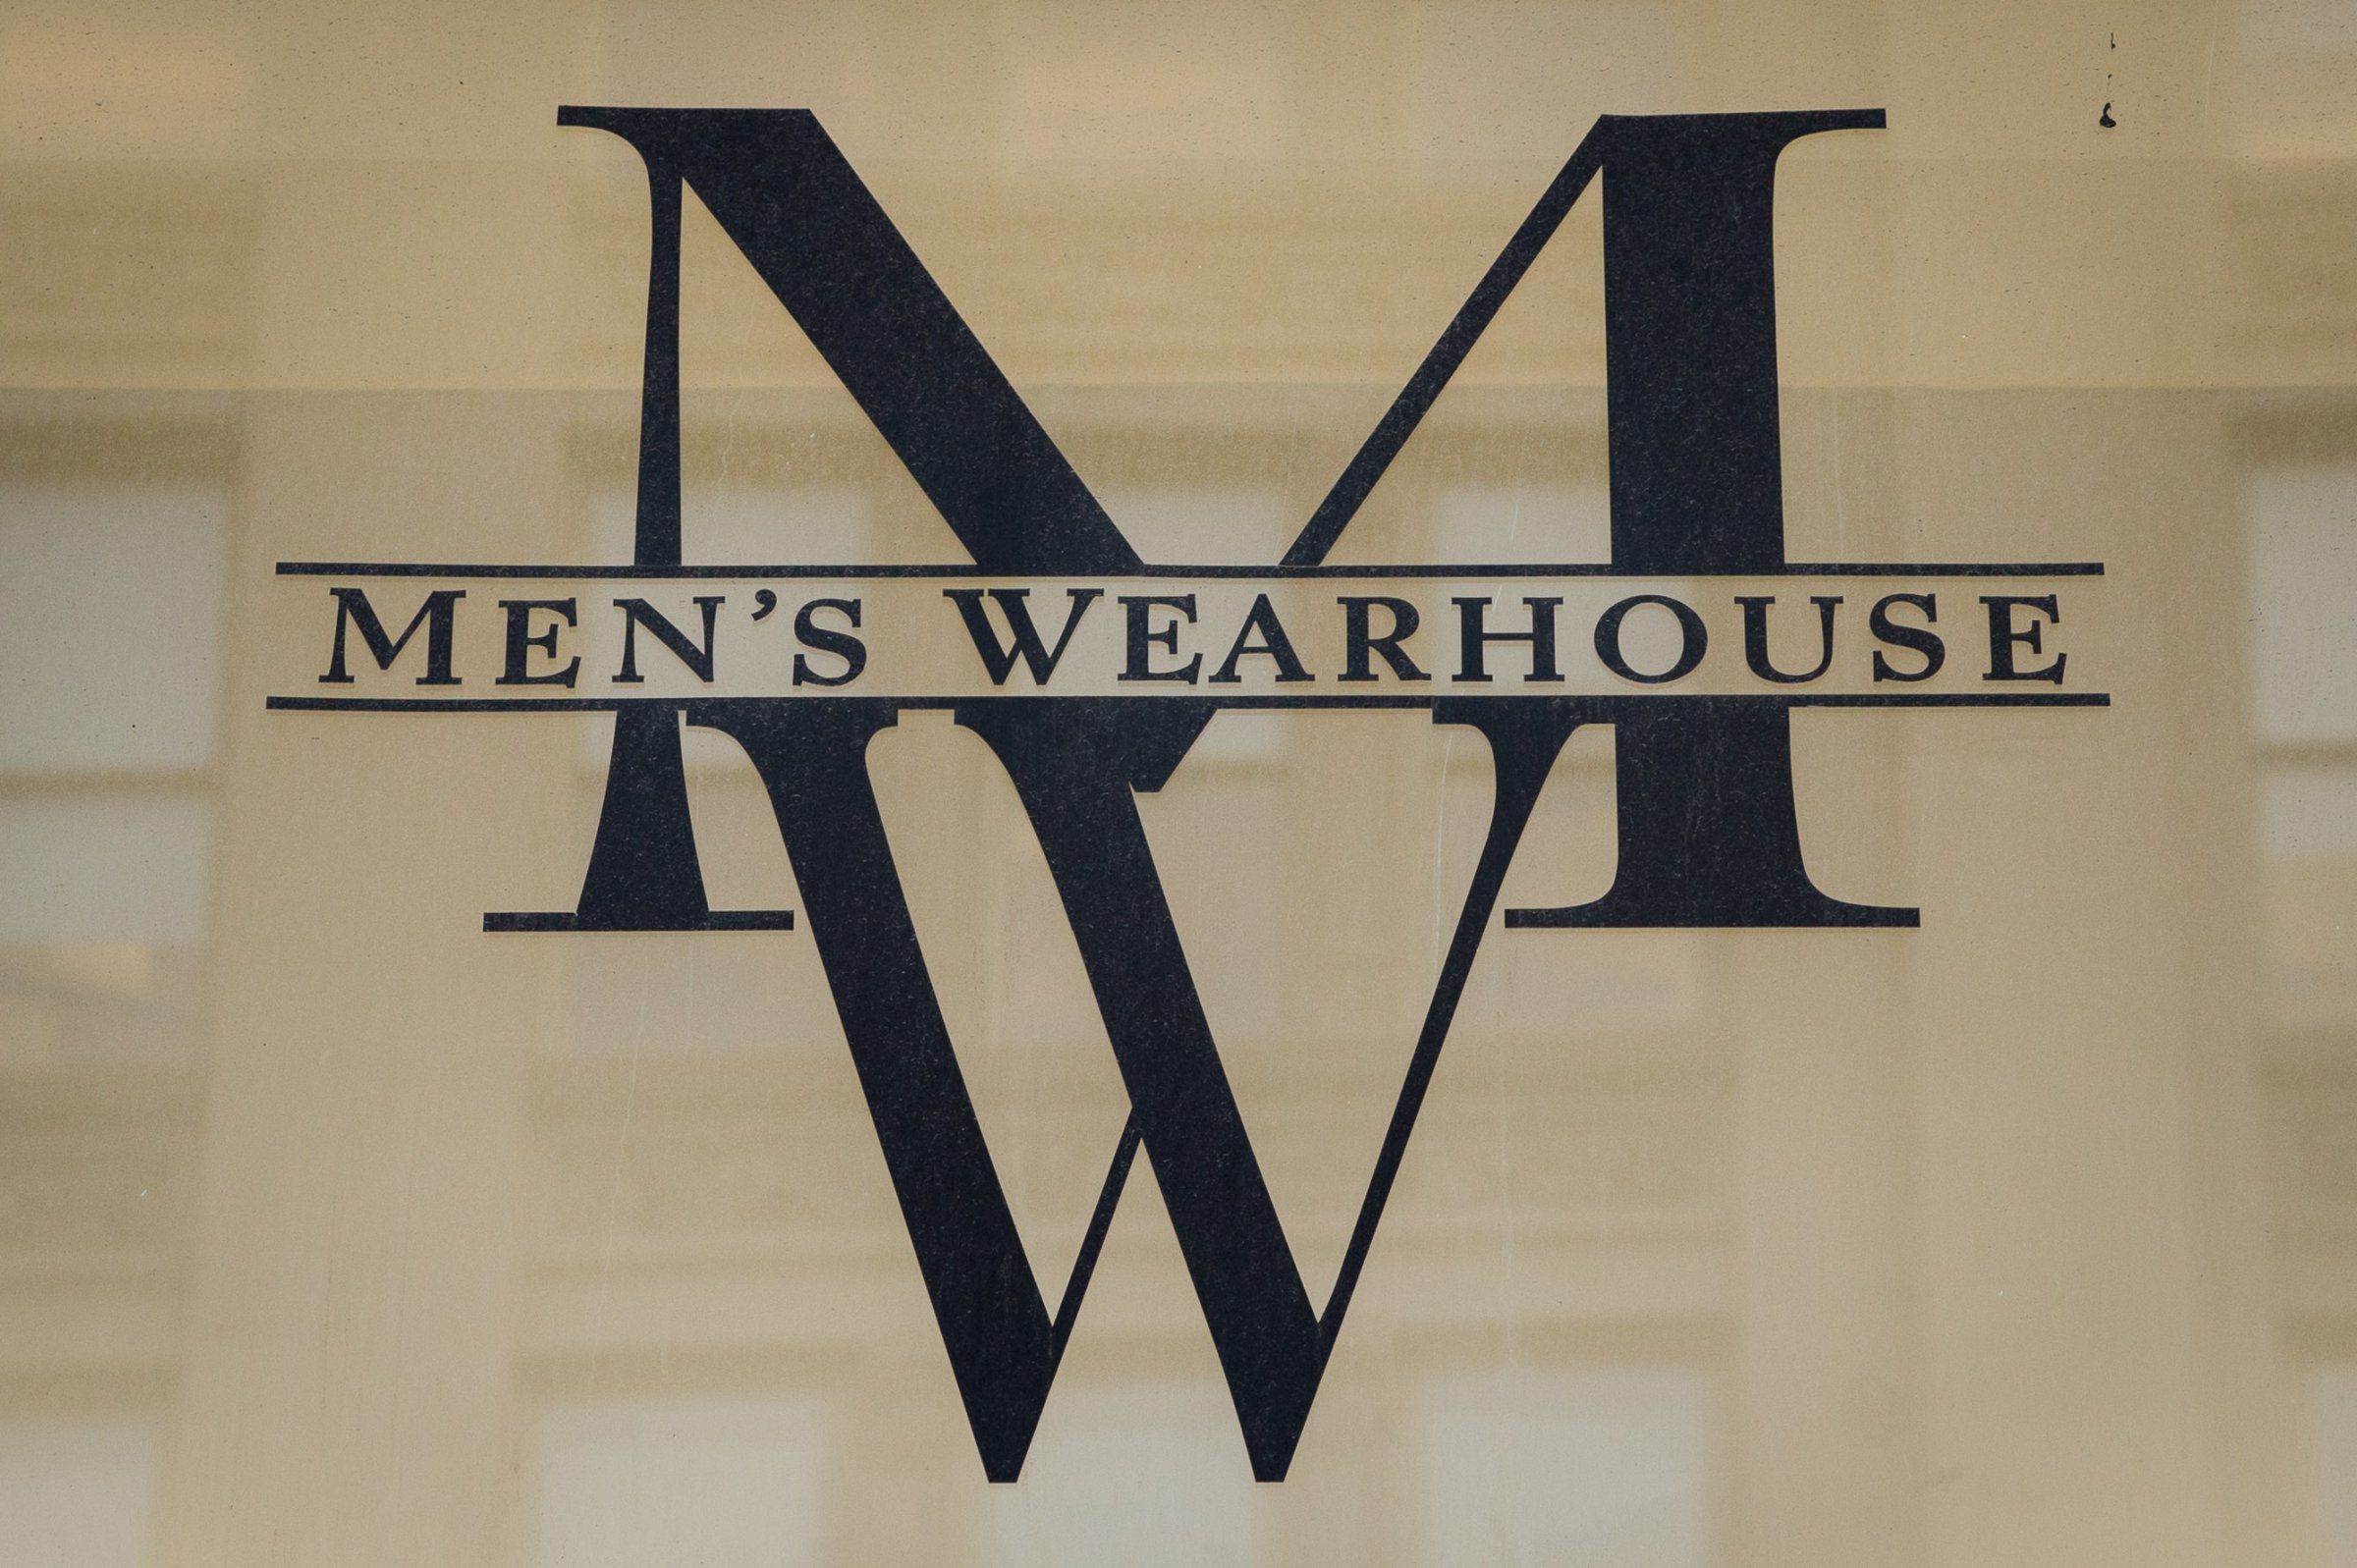 The Men's Wearhouse Inc. logo is displayed outside of a store on 6th Avenue in New York, U.S., on Monday, Dec. 2, 2013.